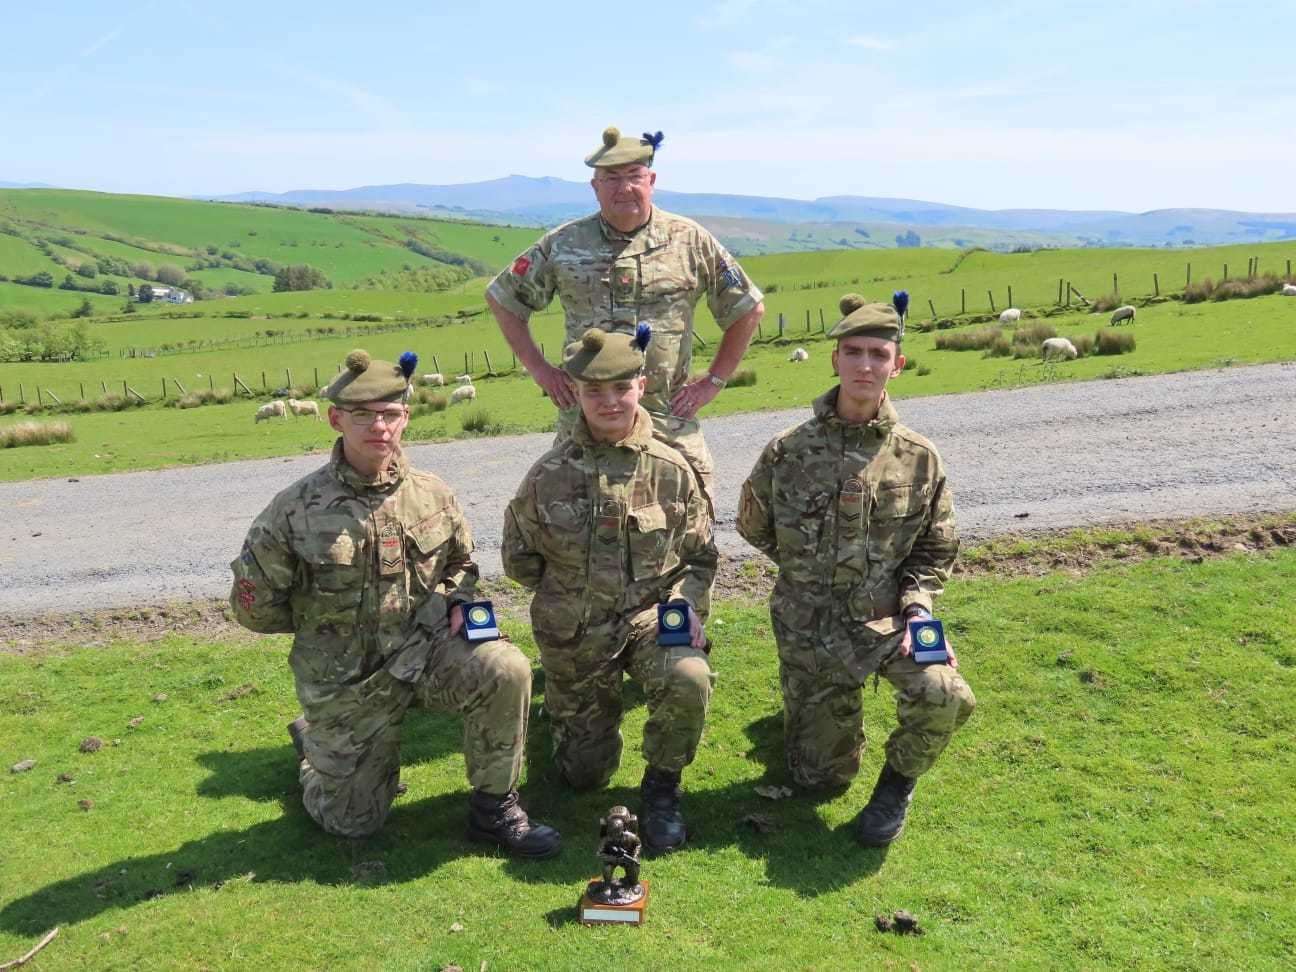 Caithness Cadets (from left) Cpl Jones, Cpl Bremner and Cpl Prideuax with Company Commander Major Neil McLean (back) who took the team to Wales.